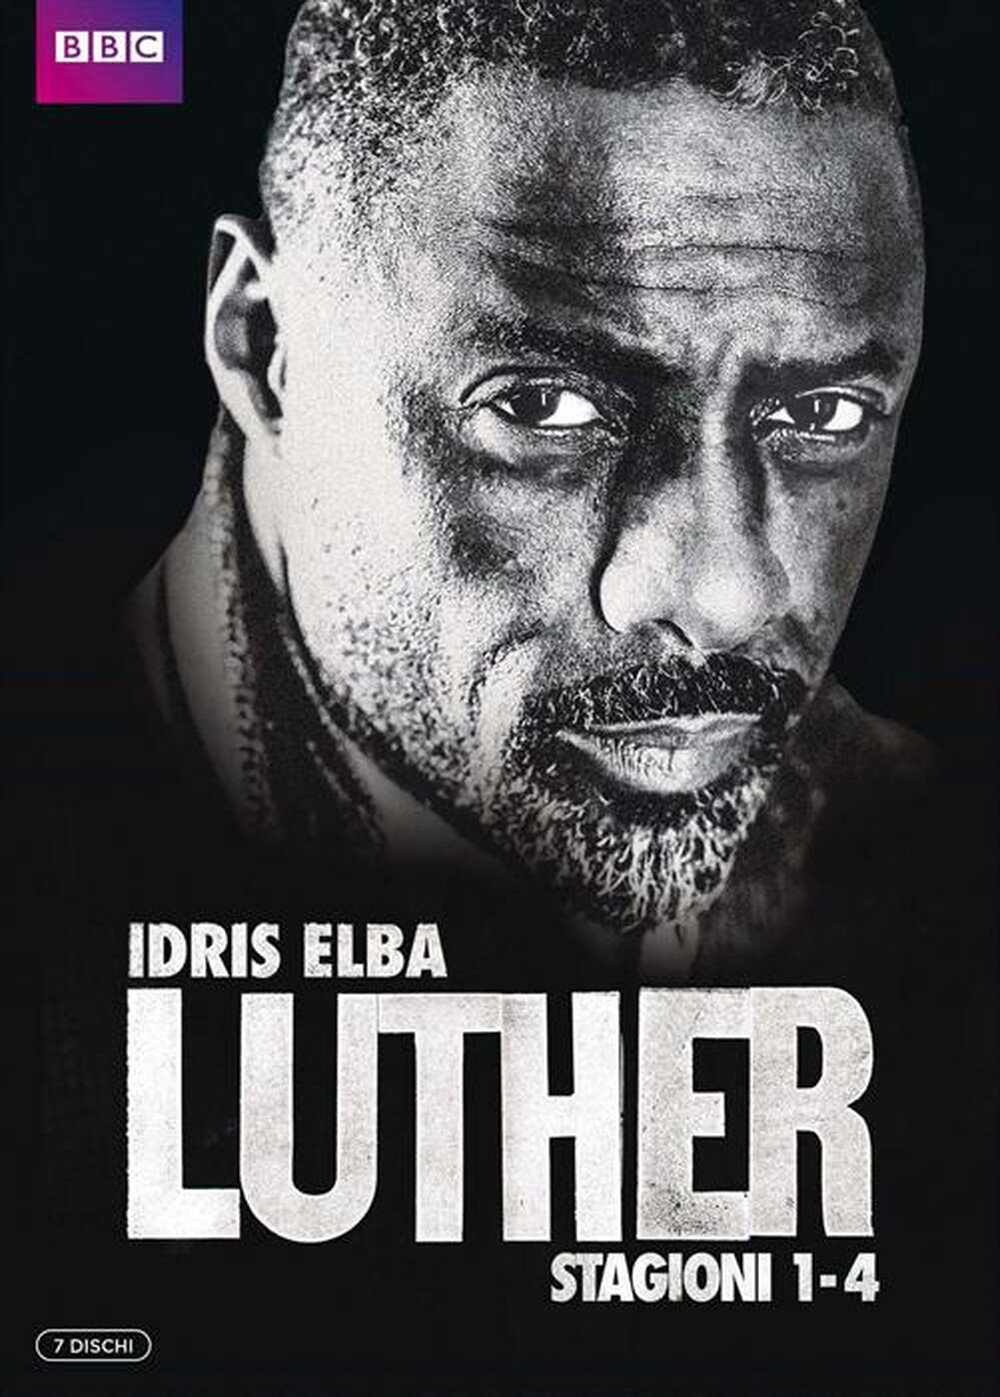 "BBC - Luther - Stagioni 01-04 (7 Dvd)"